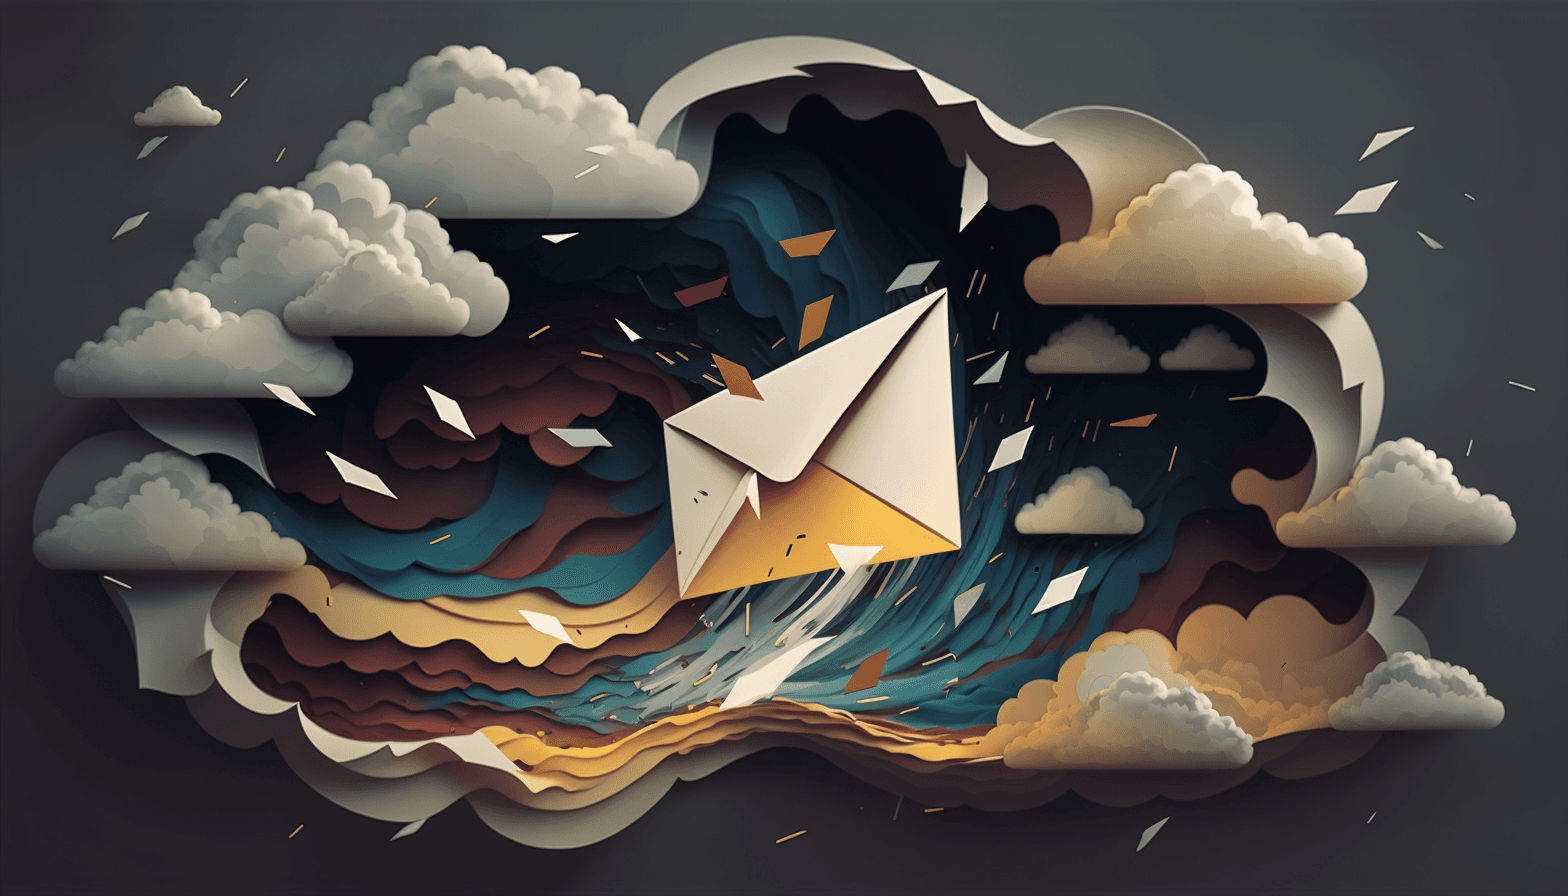 Sending Email through clouds Illustration